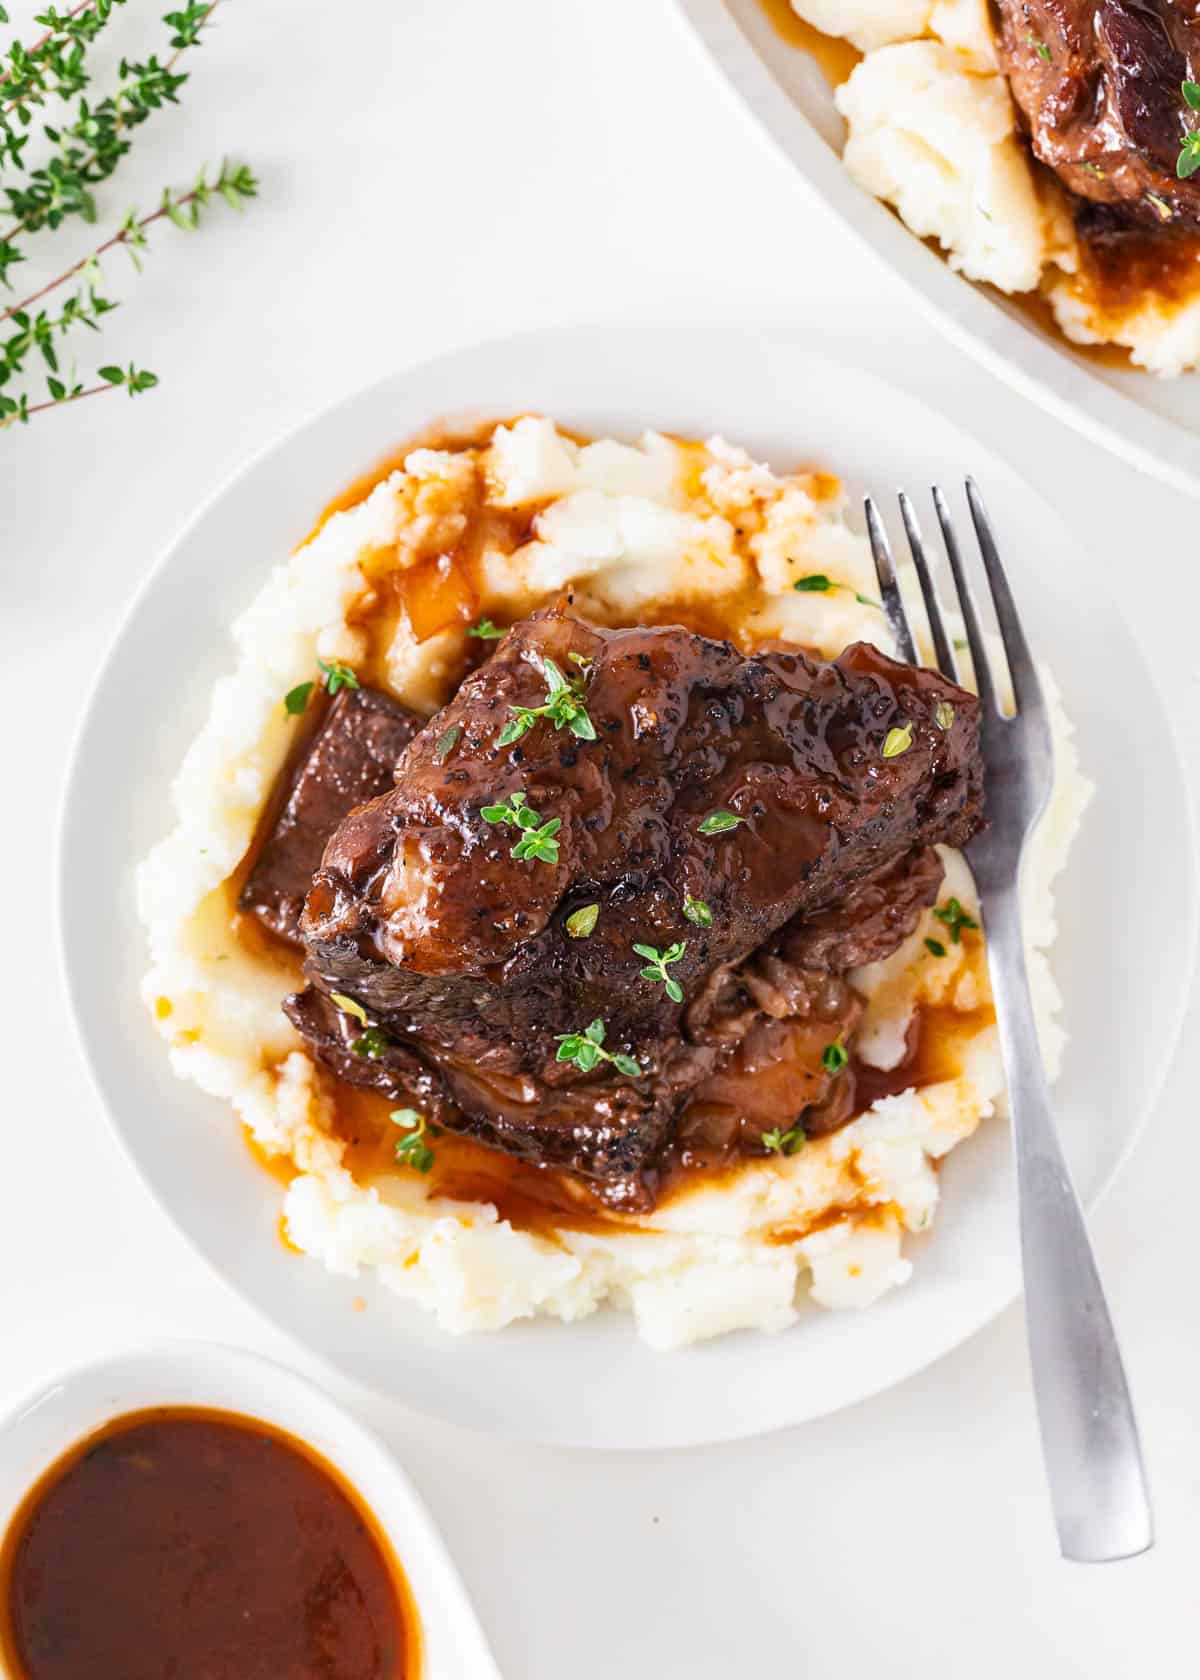 Braised short ribs served on a plate of mashed potatoes.